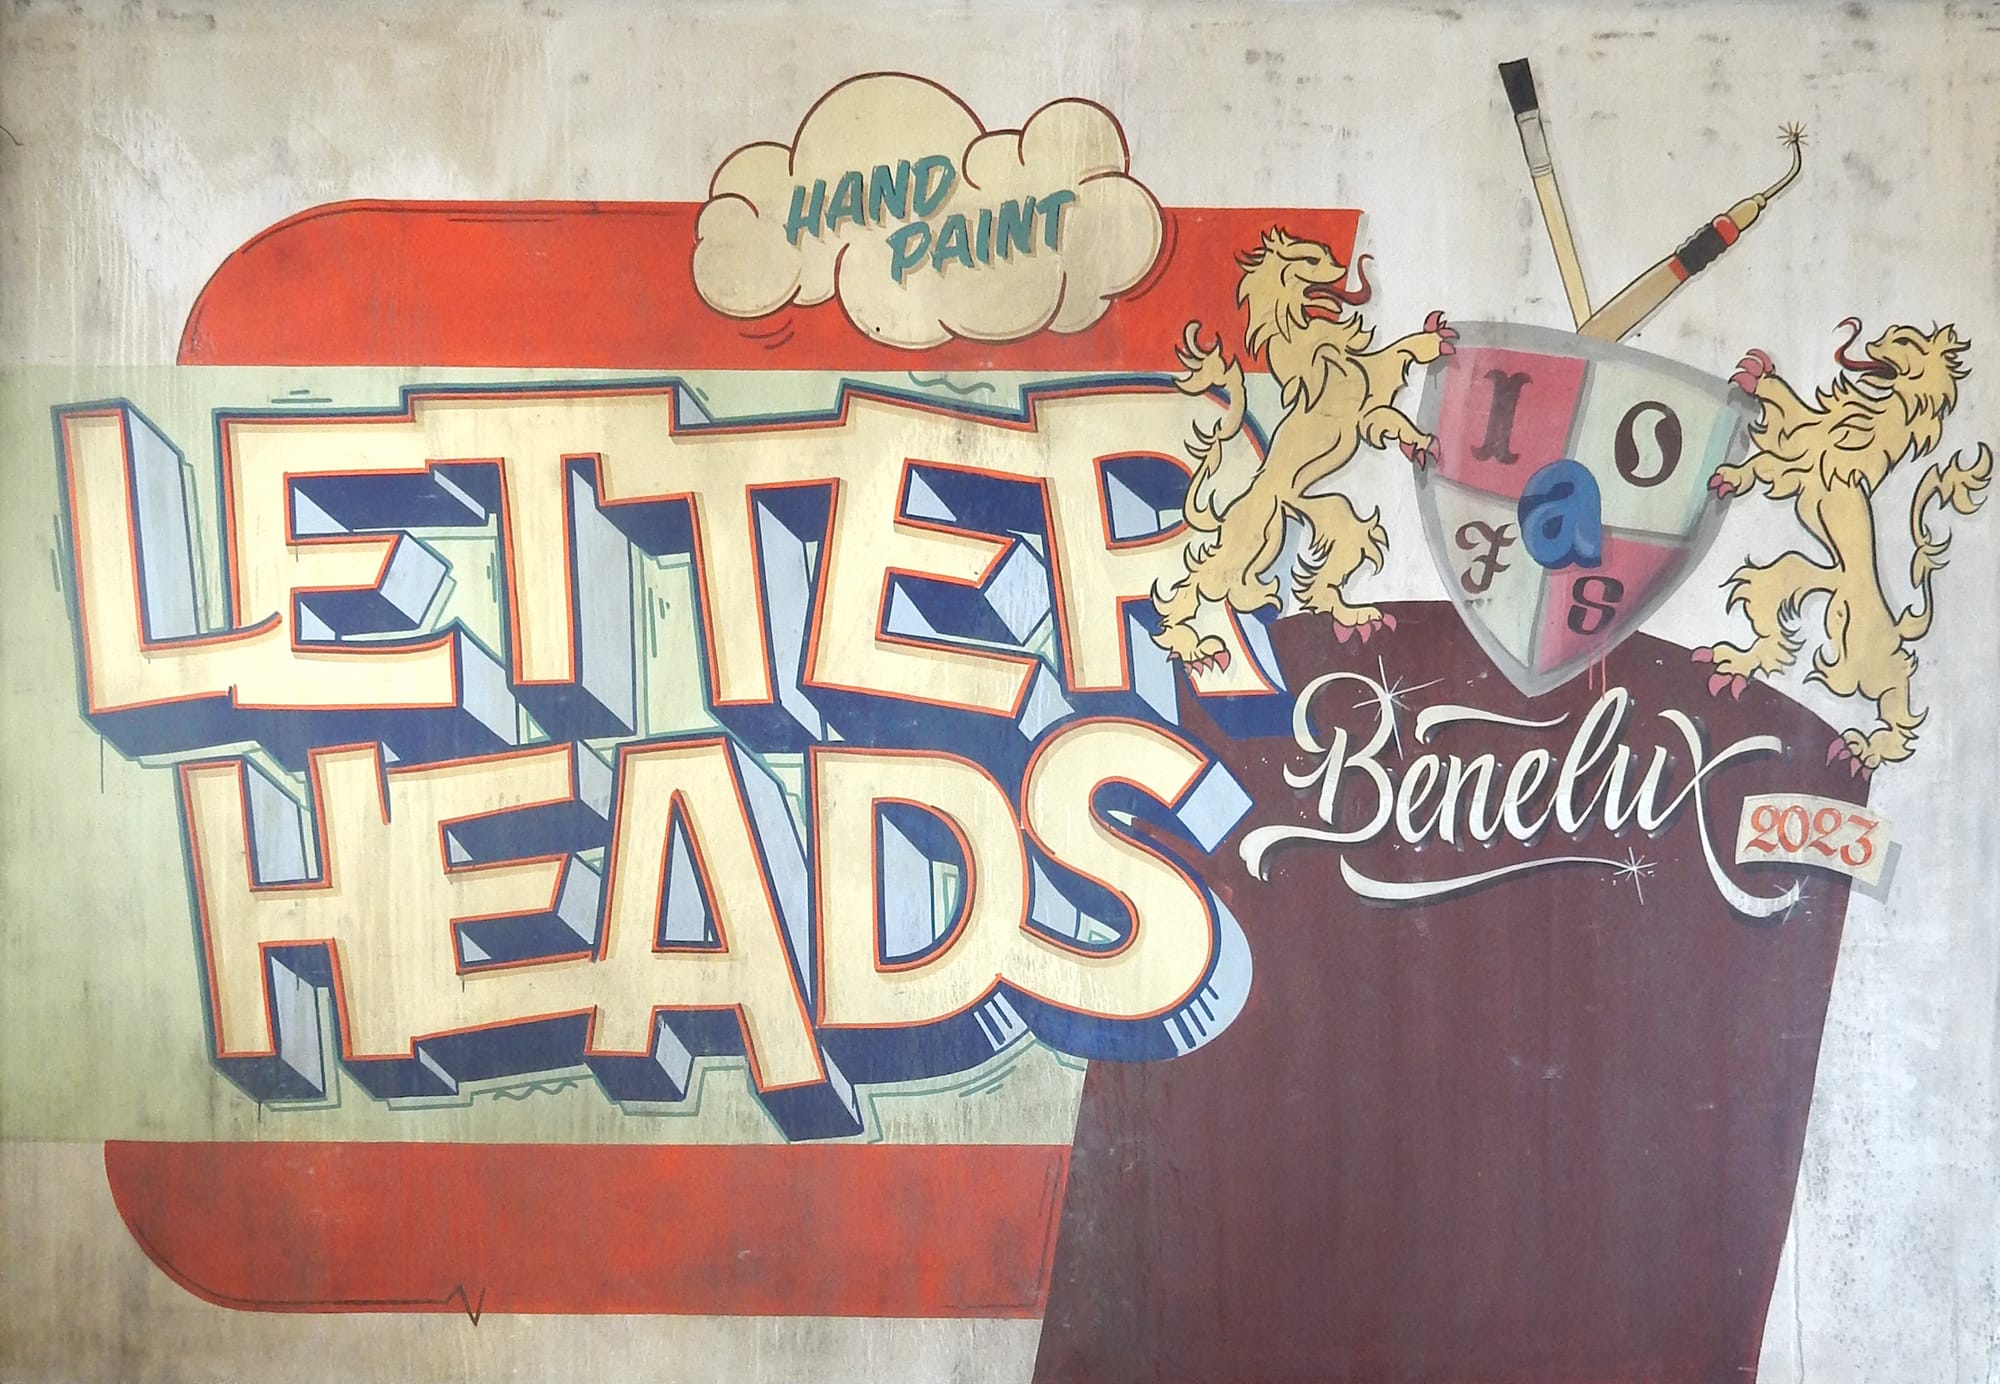 Hand-painted mural in a ghost sign style with the wording 'Hand Paint. Letterheads. Benelux. 2023. IOAFS.'